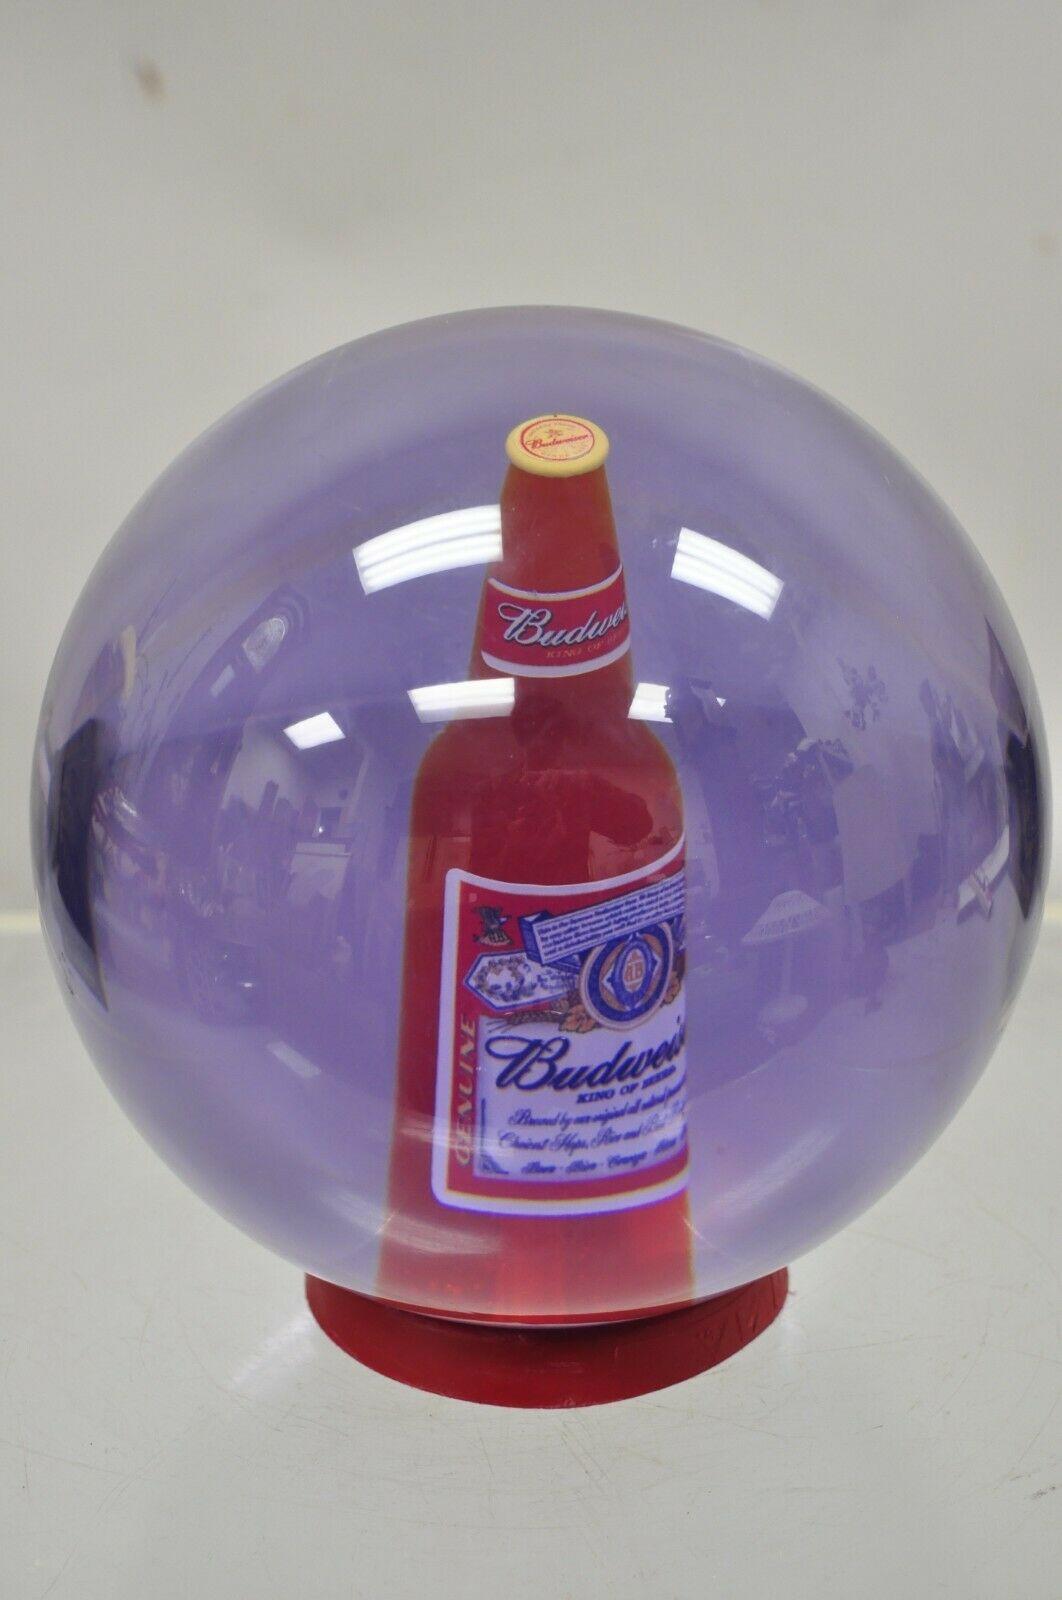 Vintage Ebonite Budweiser bottle 14 lb bowling ball with stand, New Undrilled. Item includes Stand, undrilled/unused, great purple color, very nice vintage item, approx. 14 lbs. Circa 1970. Measurements: 8.5